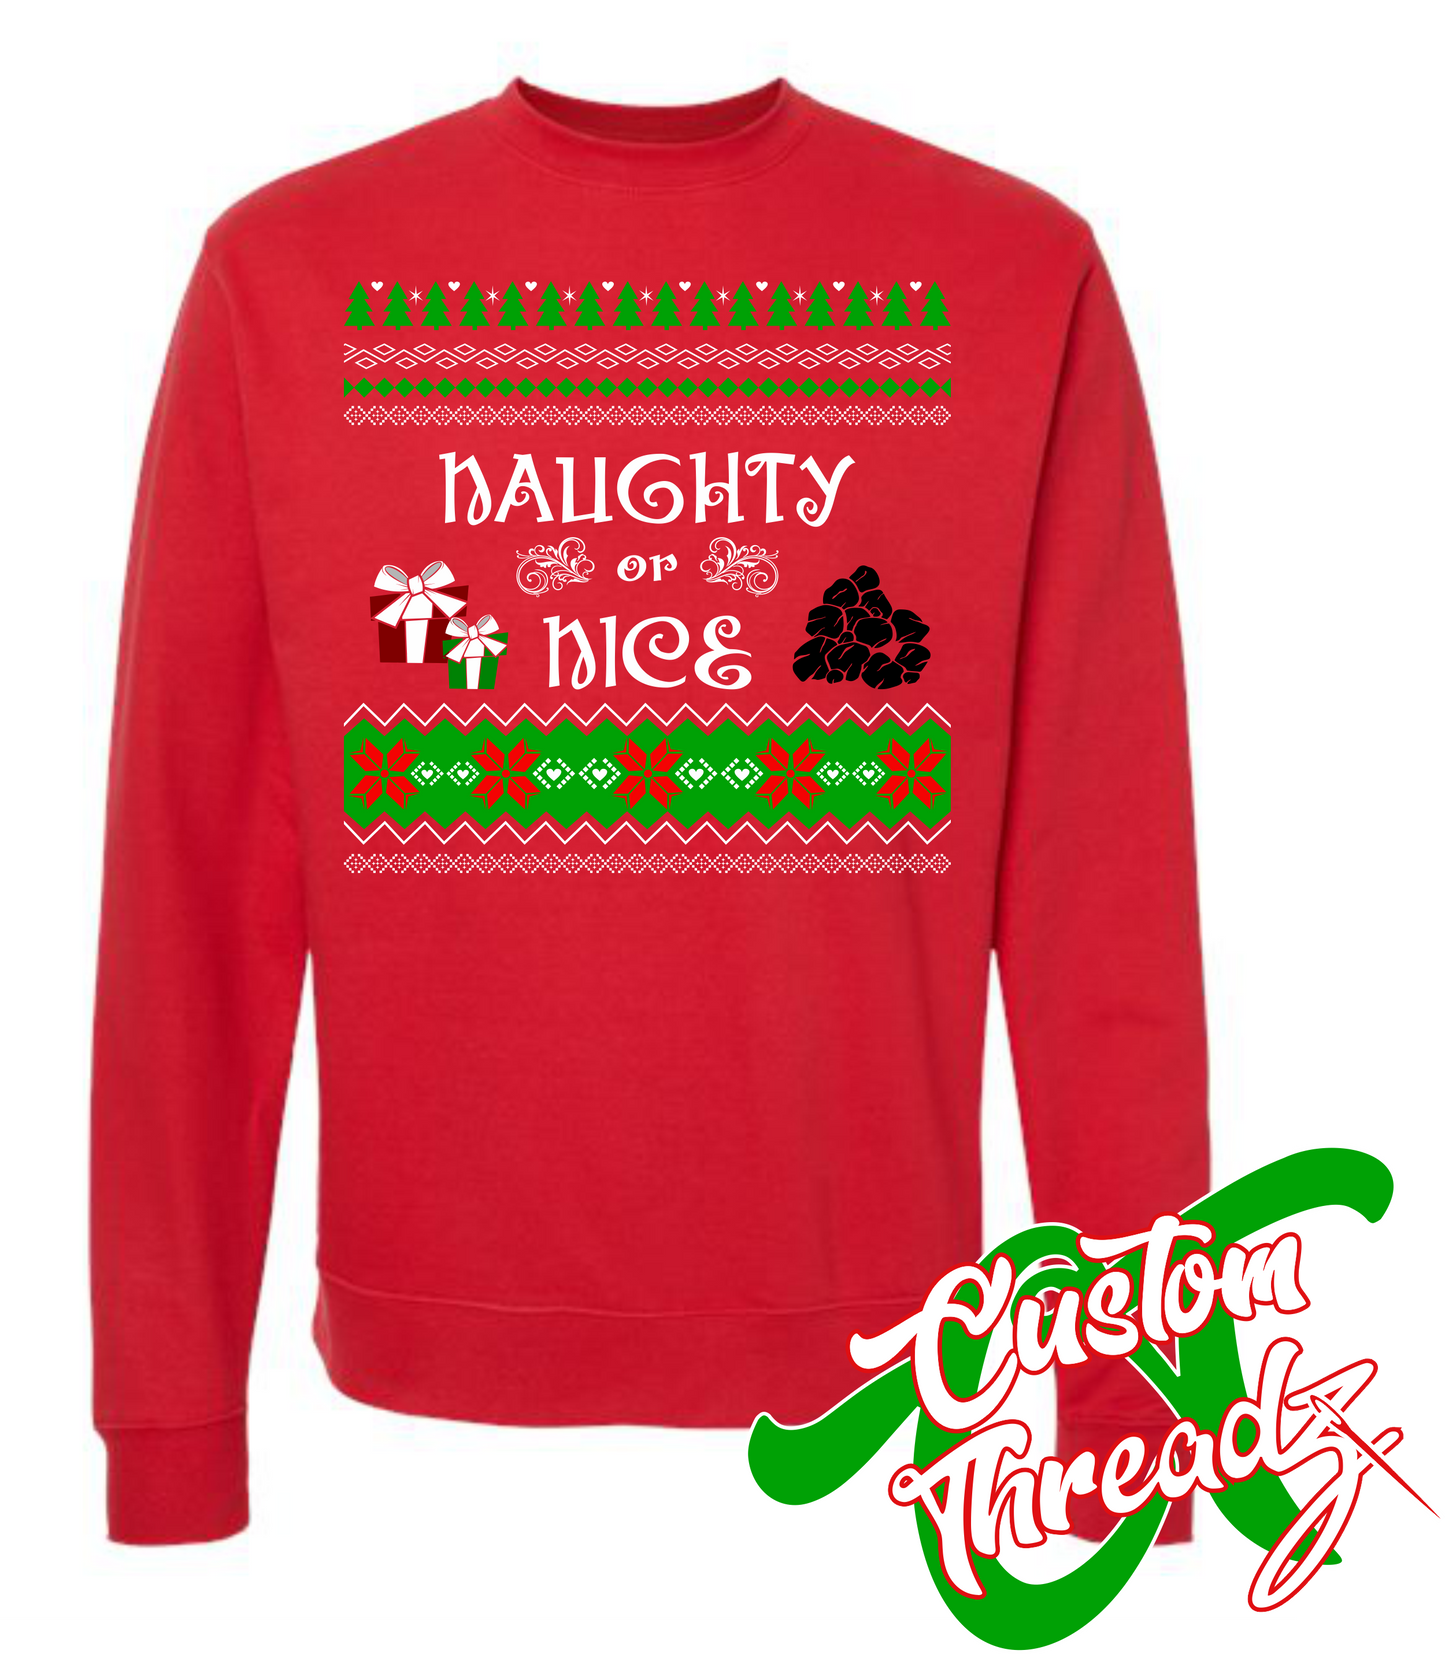 red crewneck sweatshirt with naughty or nice christmas style sweater DTG printed design